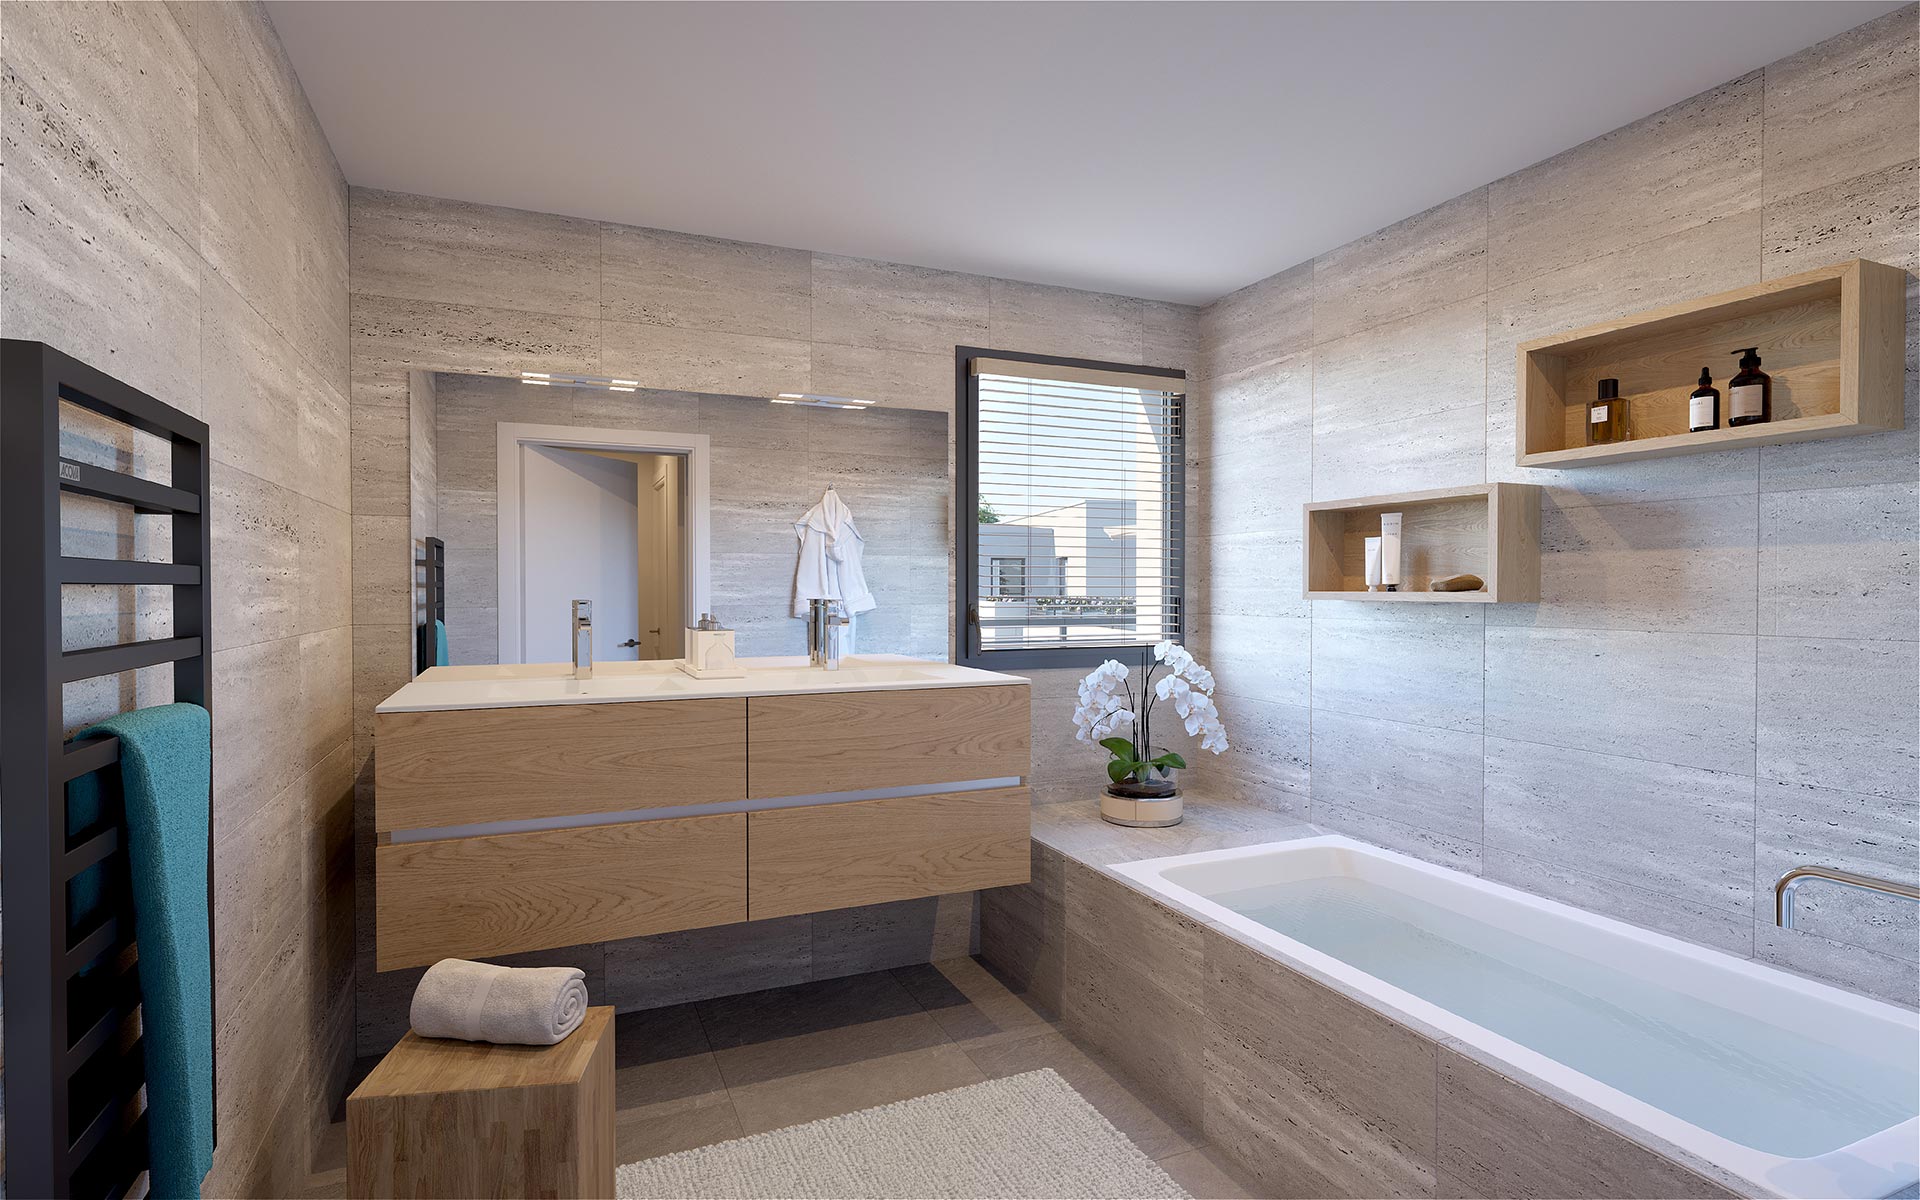 3D visualization of a bathroom for real-estate development